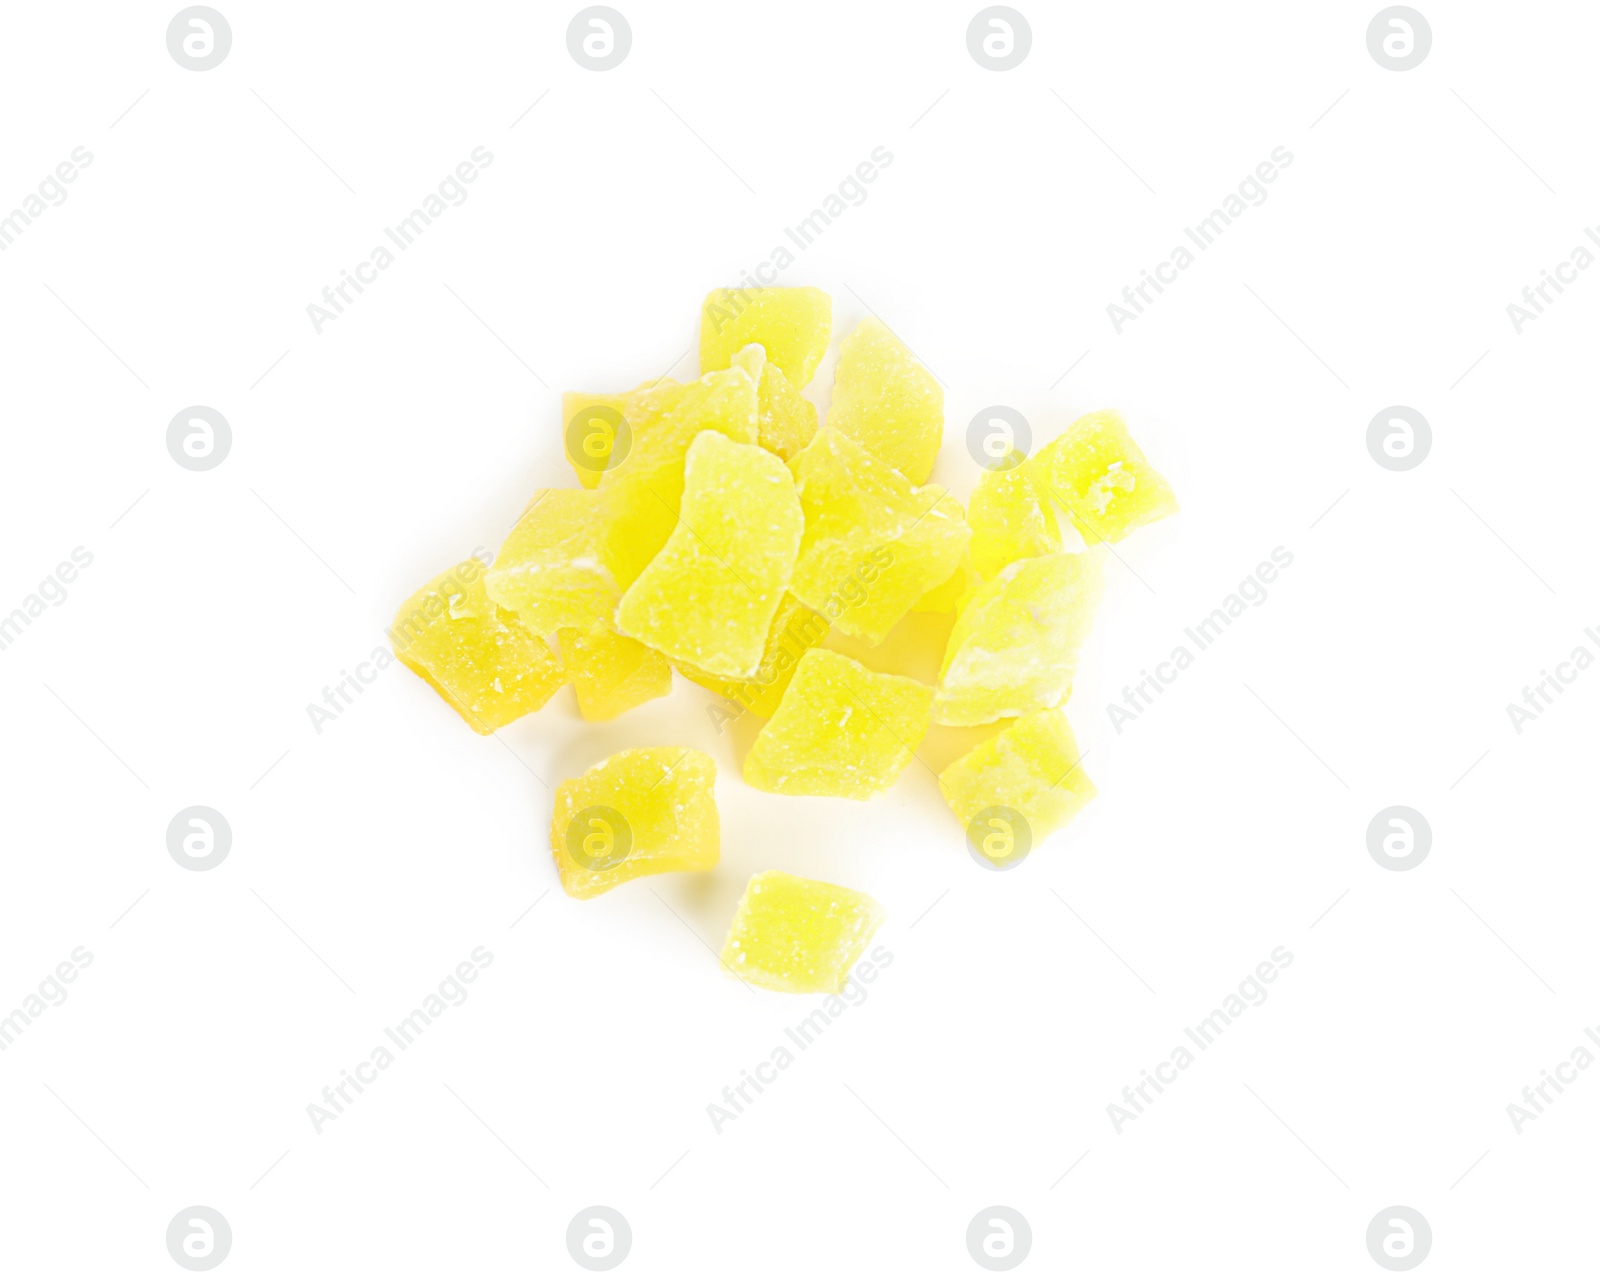 Photo of Delicious yellow candied fruit pieces on white background, top view